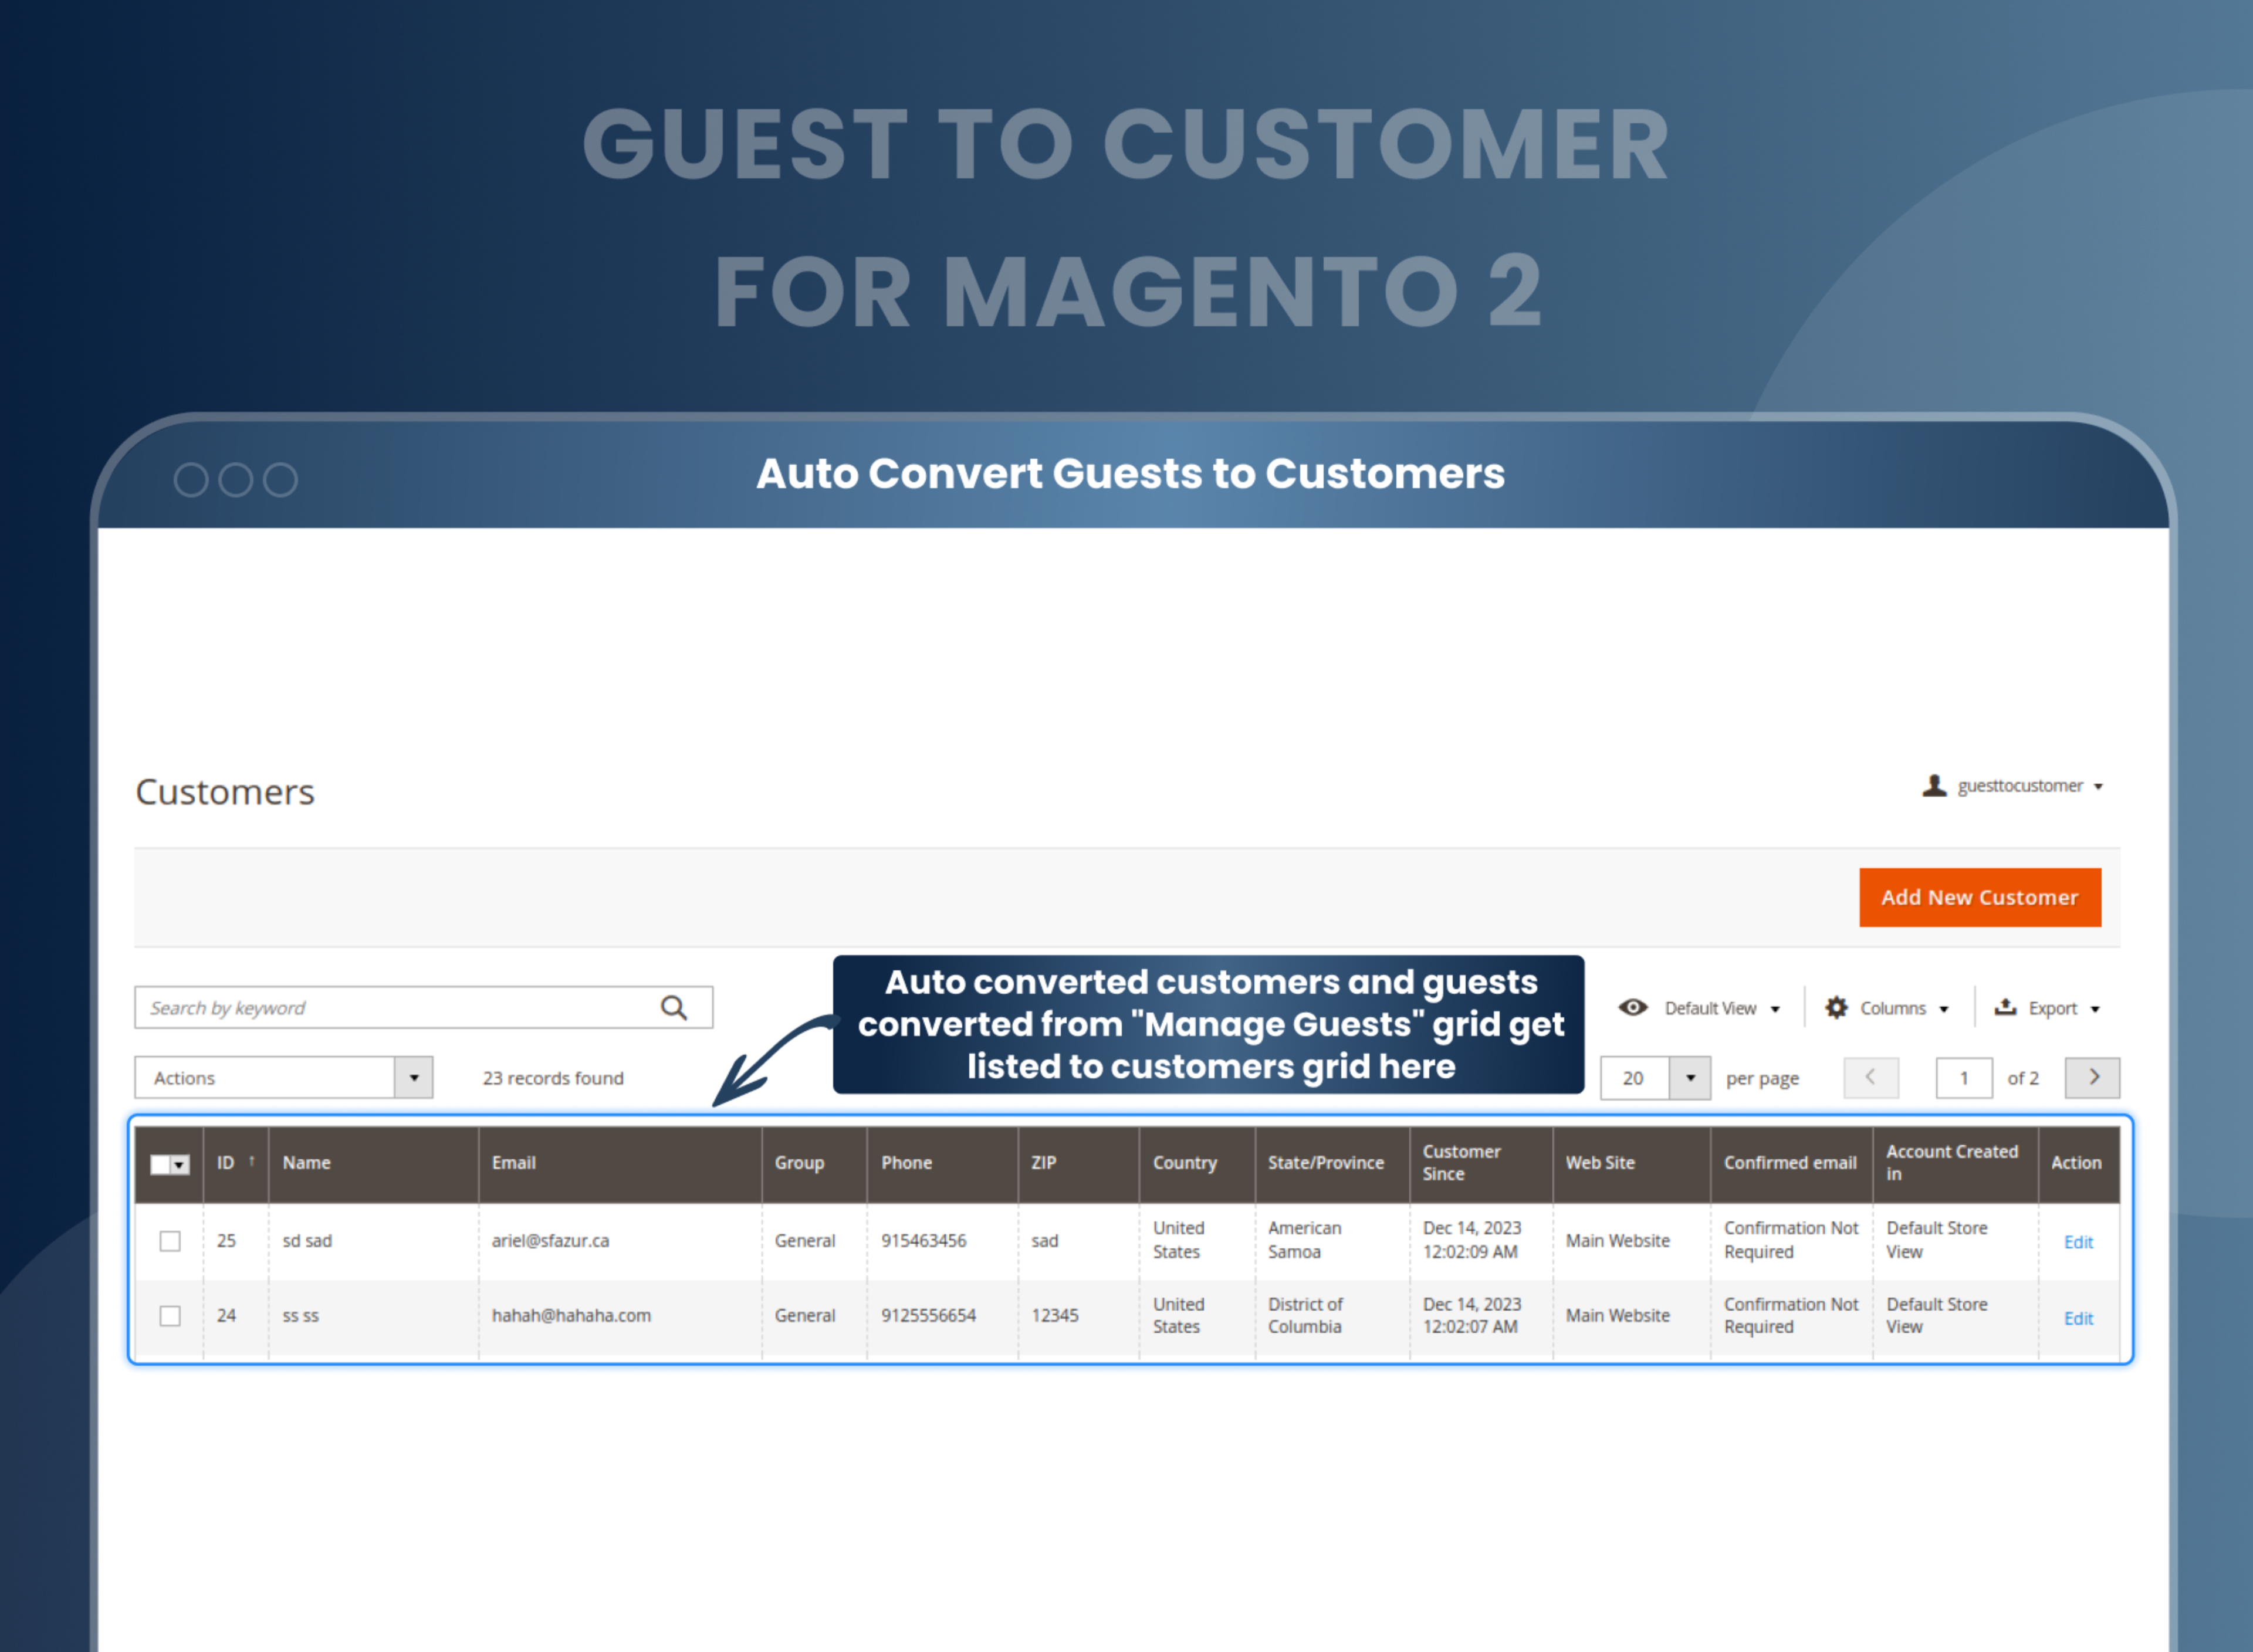 Auto Convert Guests to Customers